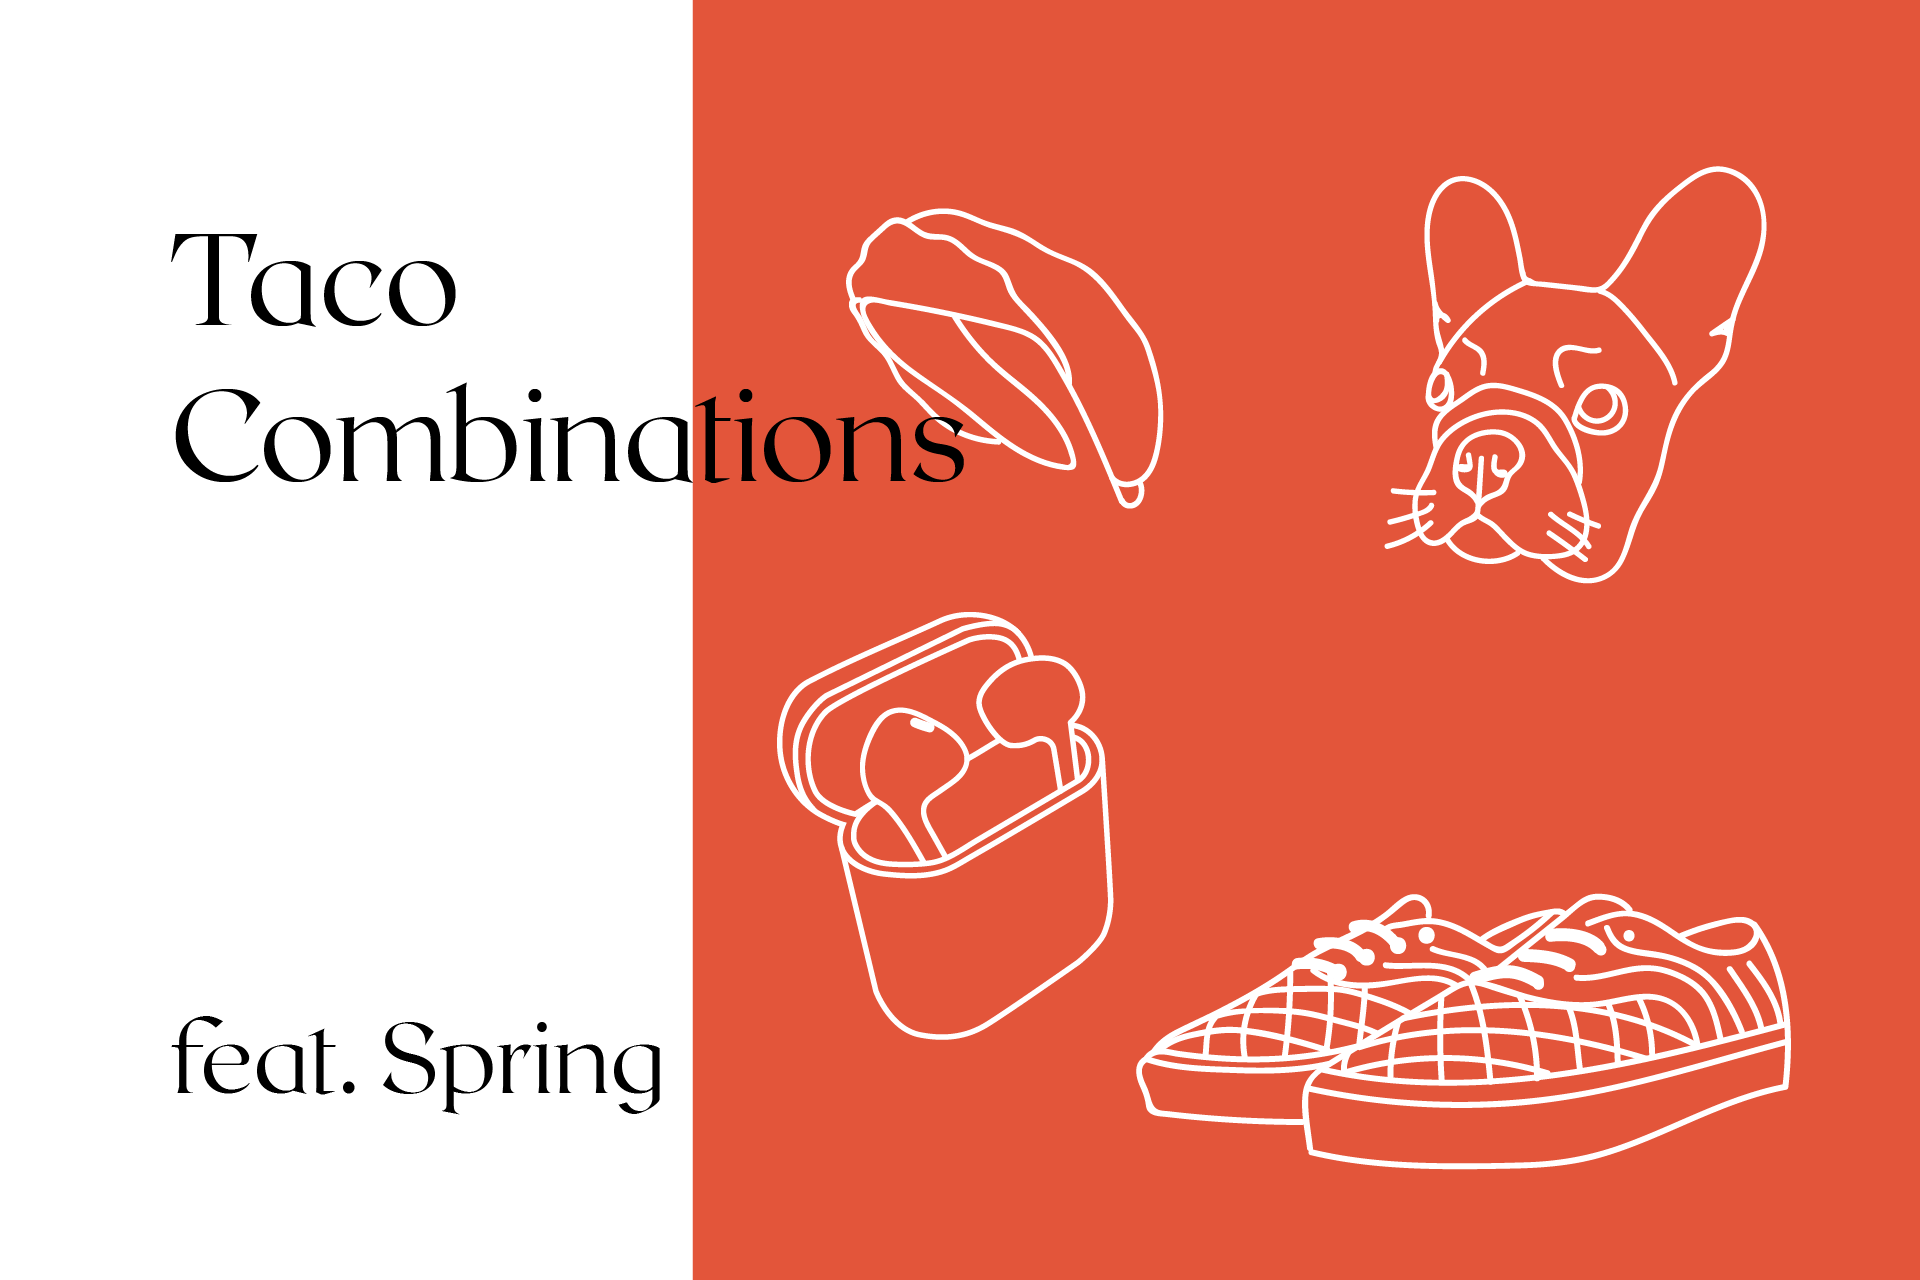 Taco Combinations ft. Spring Look